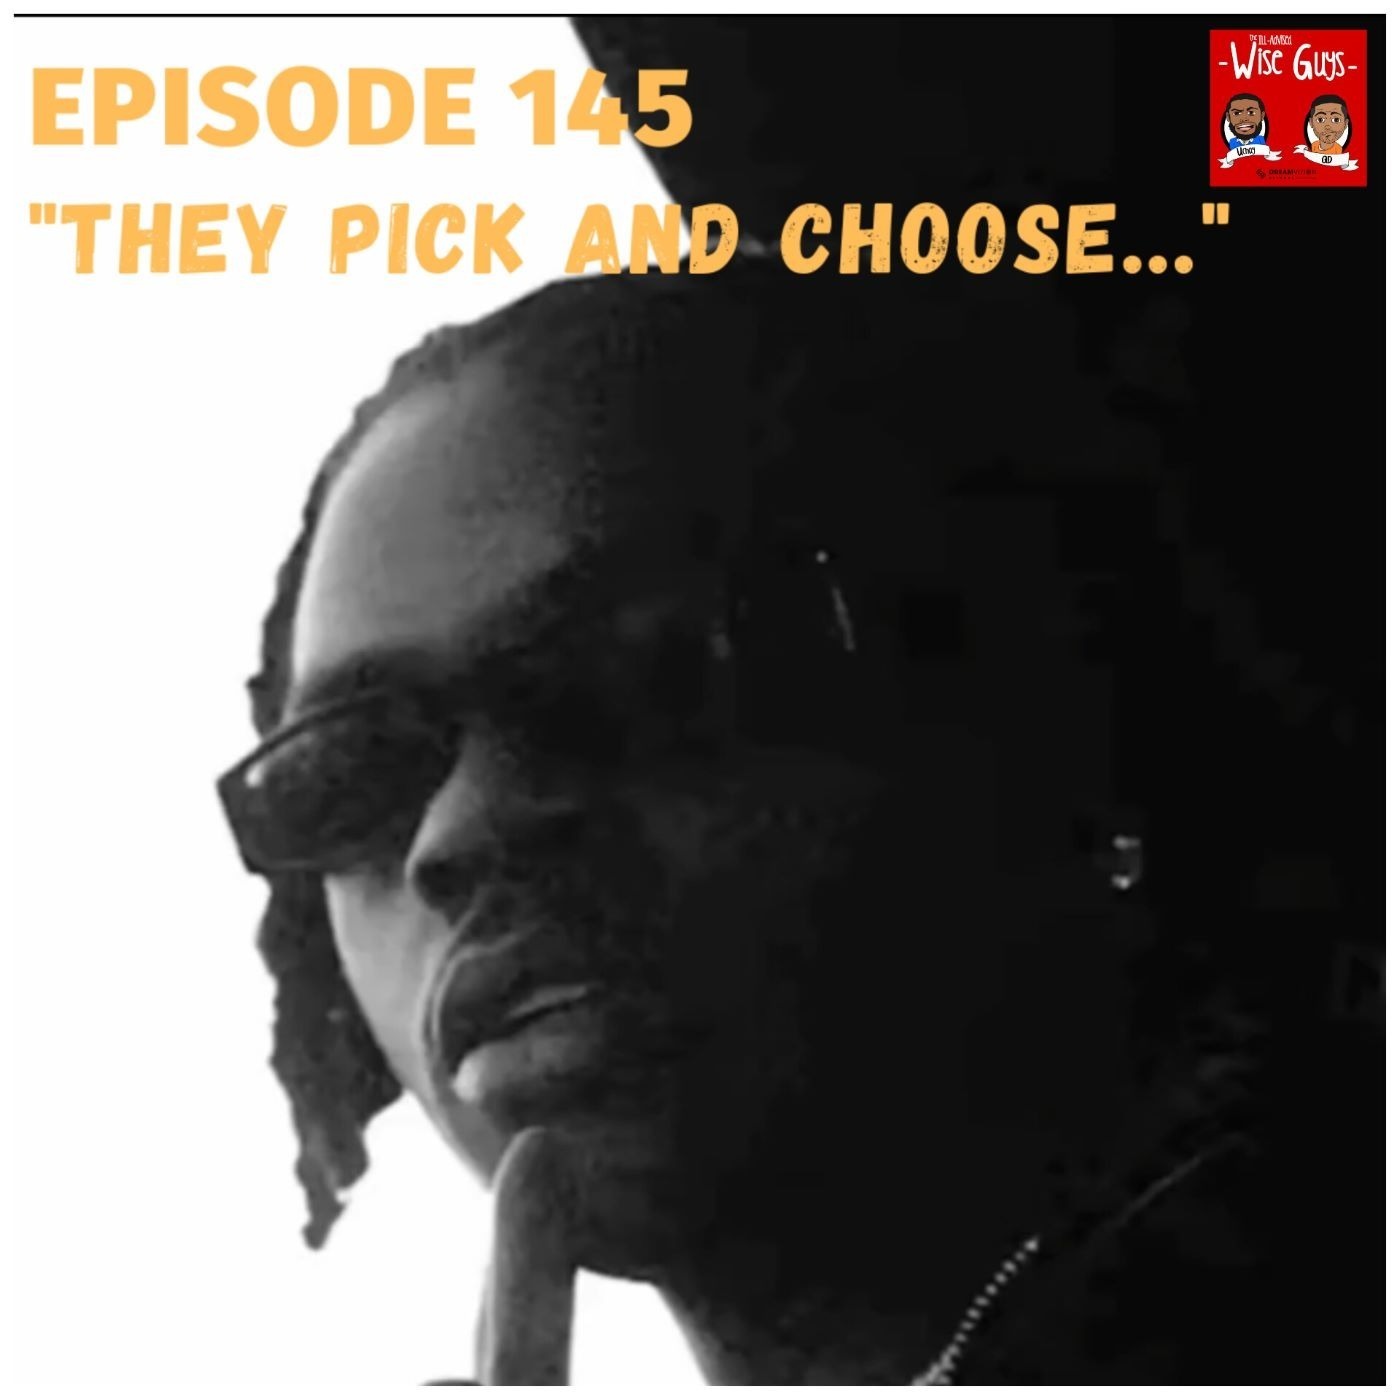 Episode 145 - "They Pick and Choose..."